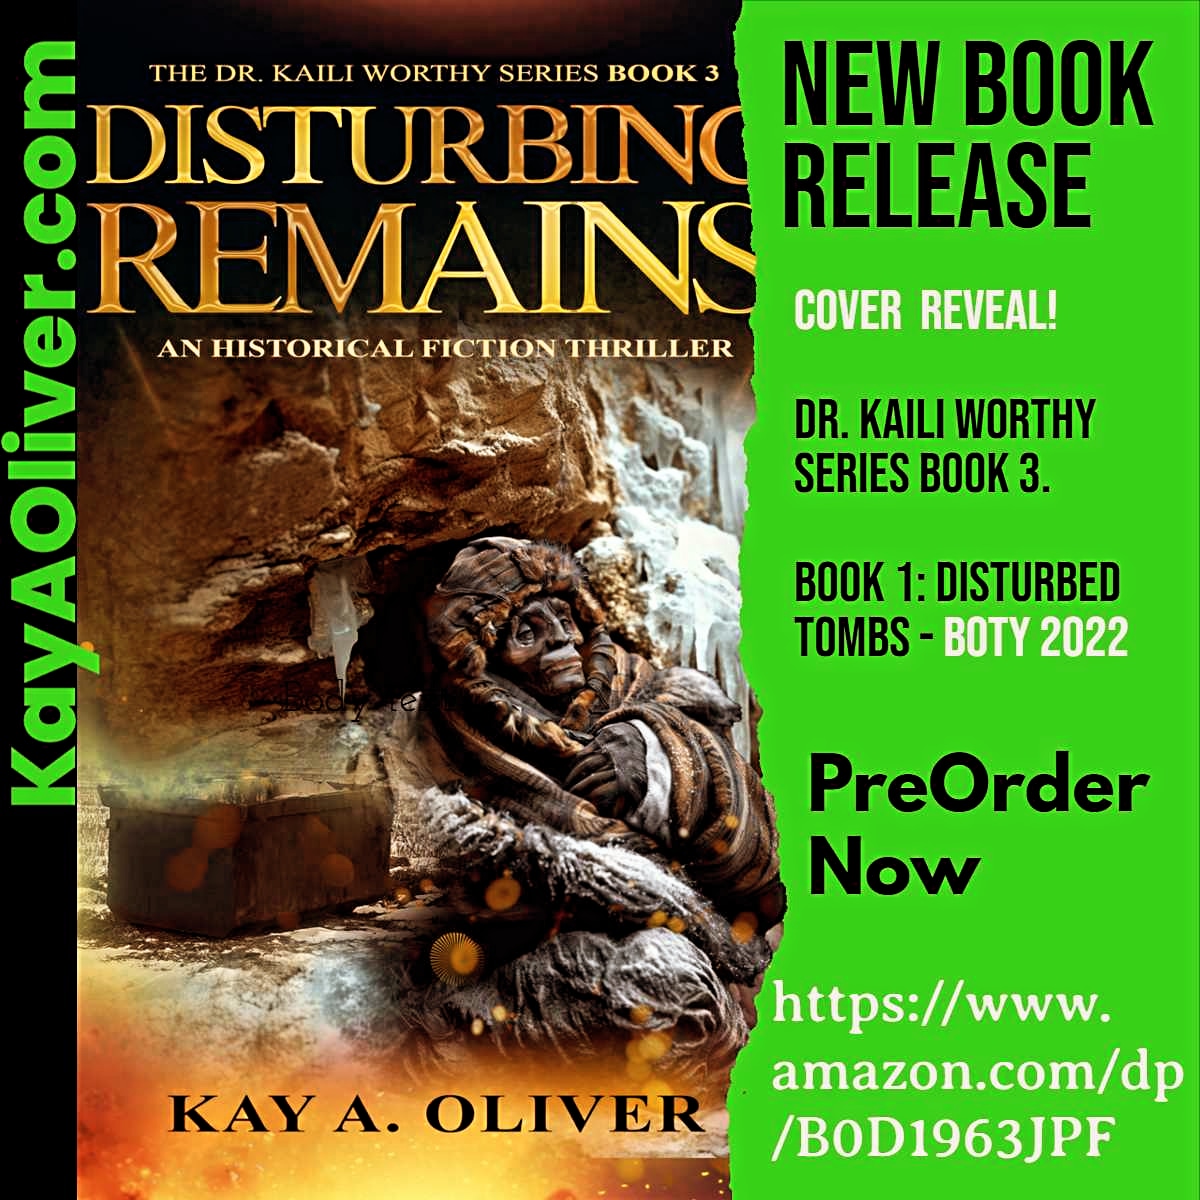 New Book Release April 29th - Intro price

Book 3, Disturbing Remains, in the award-winning Dr. Kaili Worthy Series which started w/BOTY 2022 Disturbed Tombs. LINK: amazon.com/dp/B0D1963JPF
#preordernow #newbookrelease #newbook #awardwinning #fiction #booklovers #bookworm #booktok